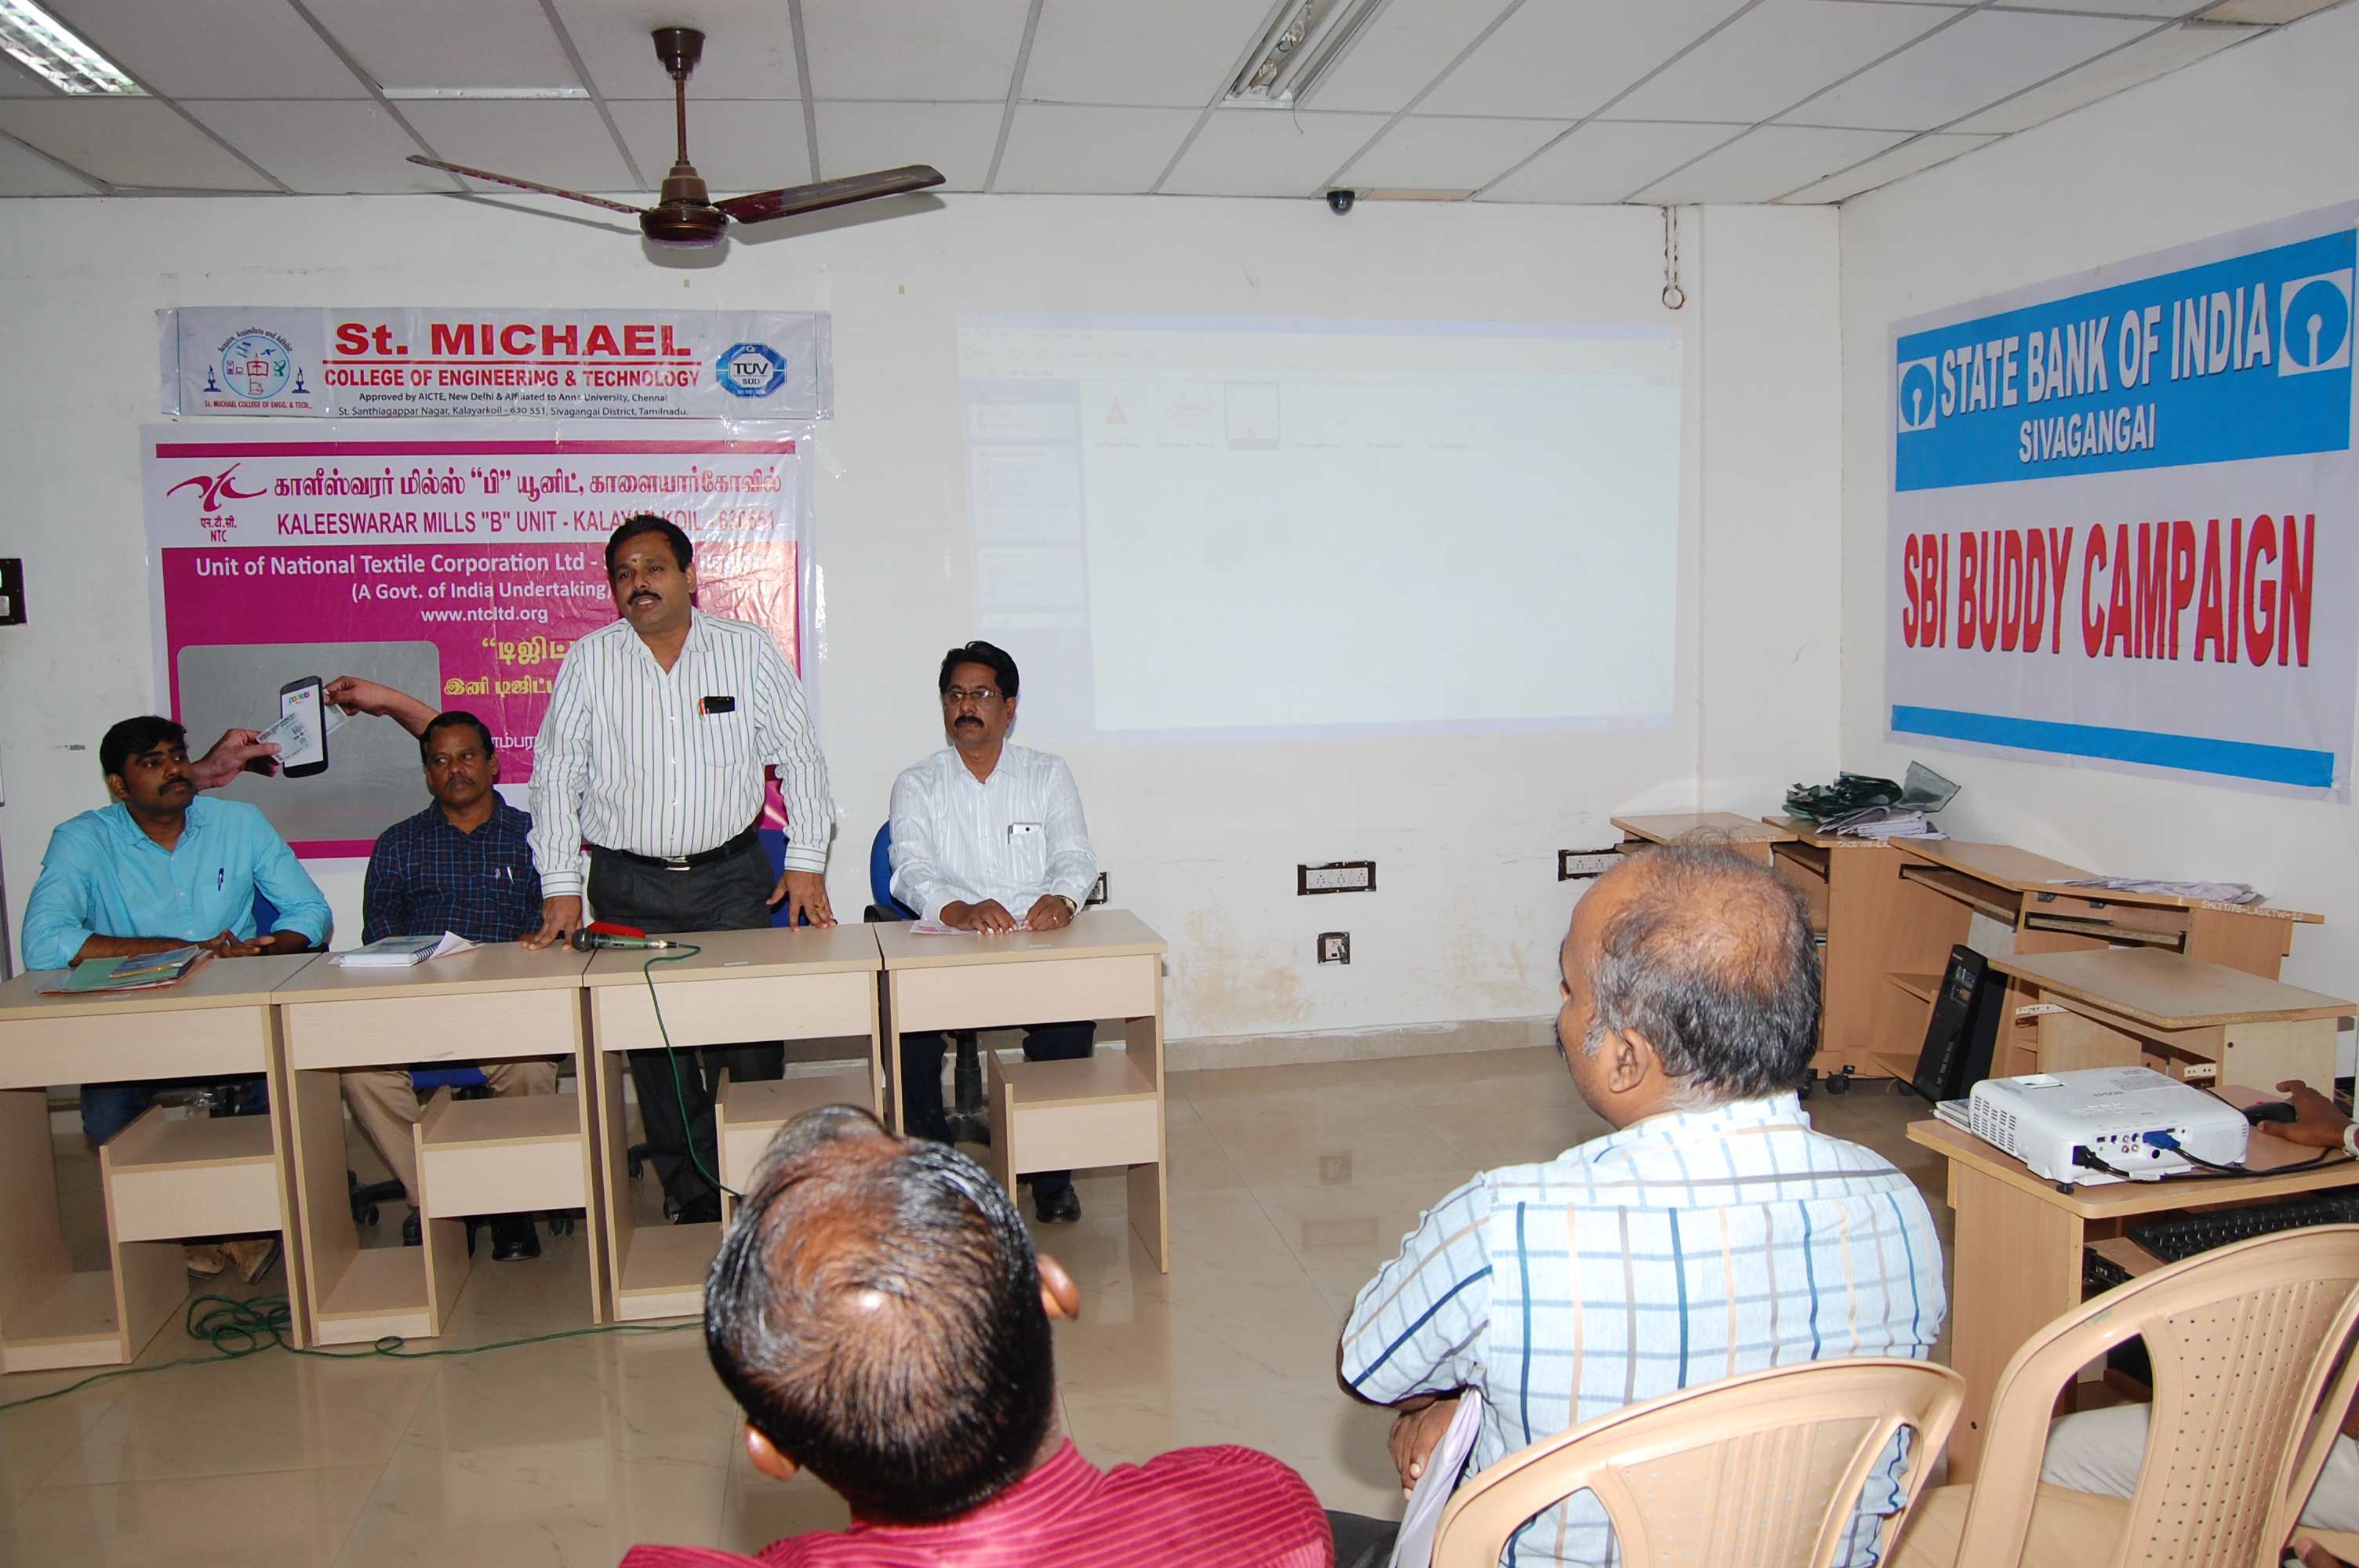 UPI Camp in St. MICHAEL College Of Engineering & Technology by Kaleeswara Mills B Unit